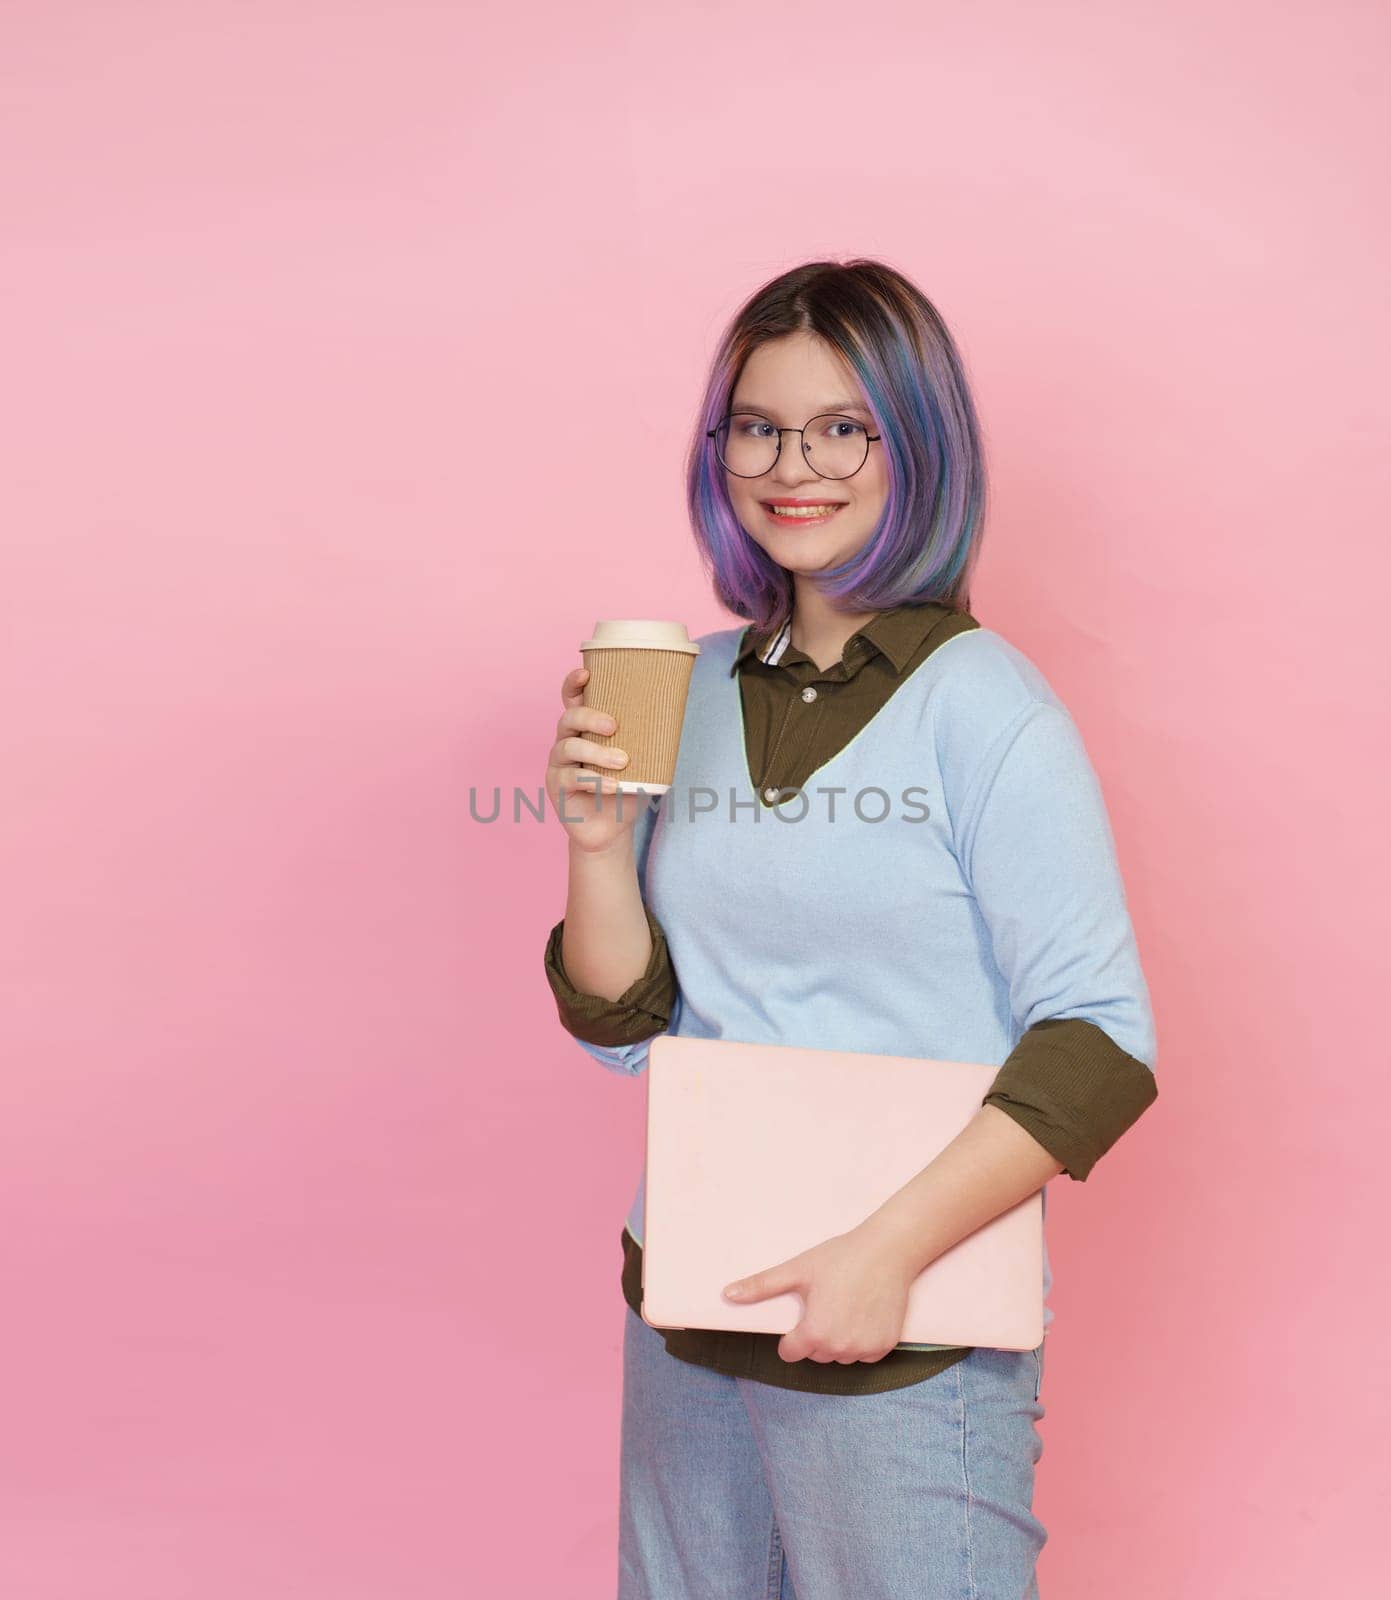 Smiling pupil girl teenager, wearing glasses, immersed in studies with folded laptop and cup of coffee or tea on pink background. Student showcases joyful expression, embodying essence of modern teenage life. High quality photo